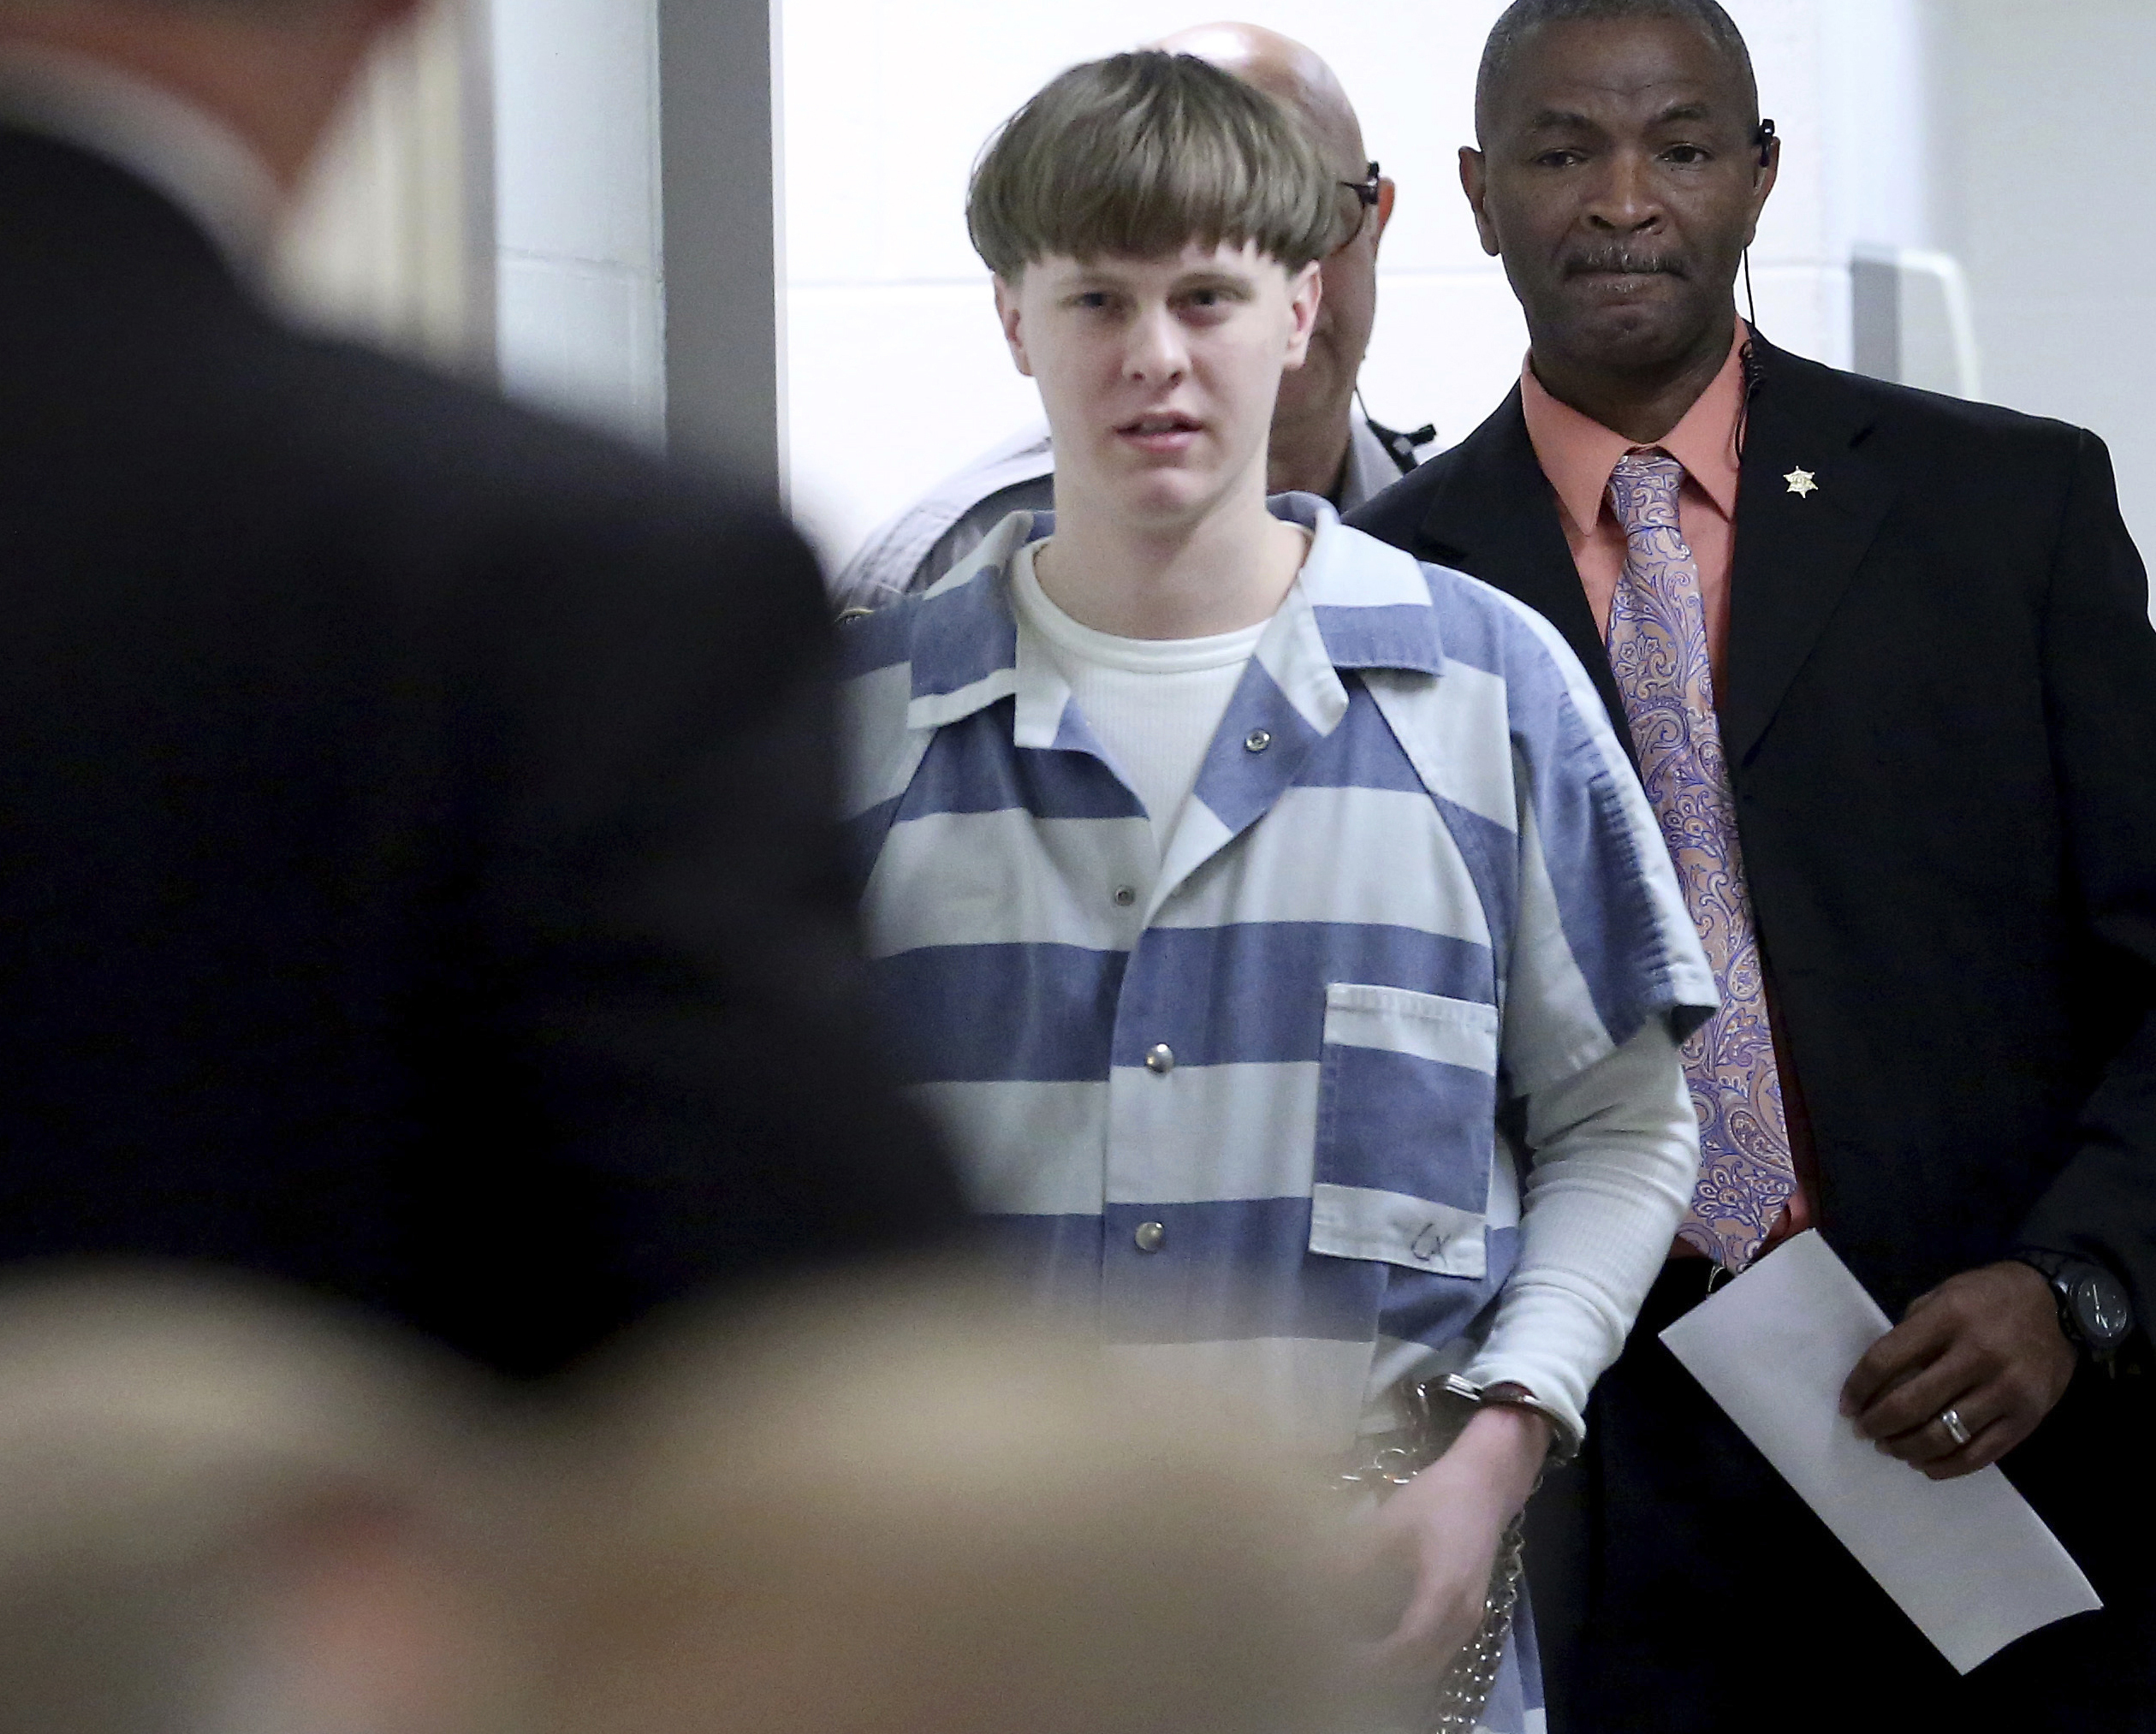 PHOTO: In this April 10, 2017, file photo, Dylann Roof enters the court room at the Charleston County Judicial Center to enter his guilty plea on murder charges in Charleston, S.C.